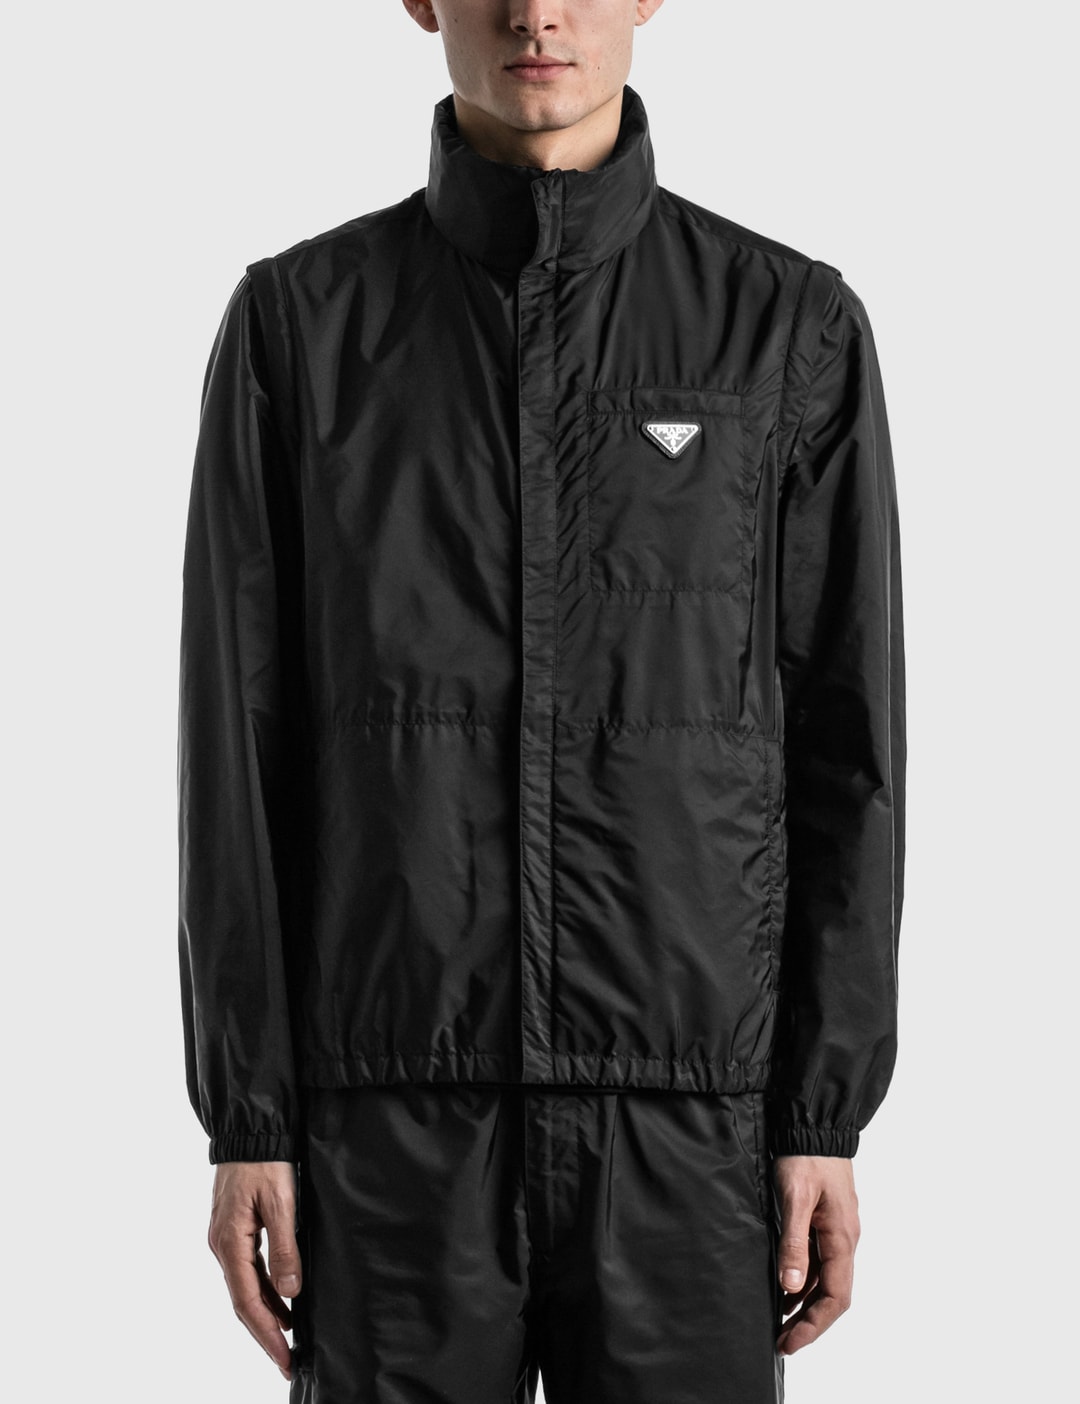 Prada - Nylon Track Jacket | HBX - Globally Curated Fashion and Lifestyle  by Hypebeast